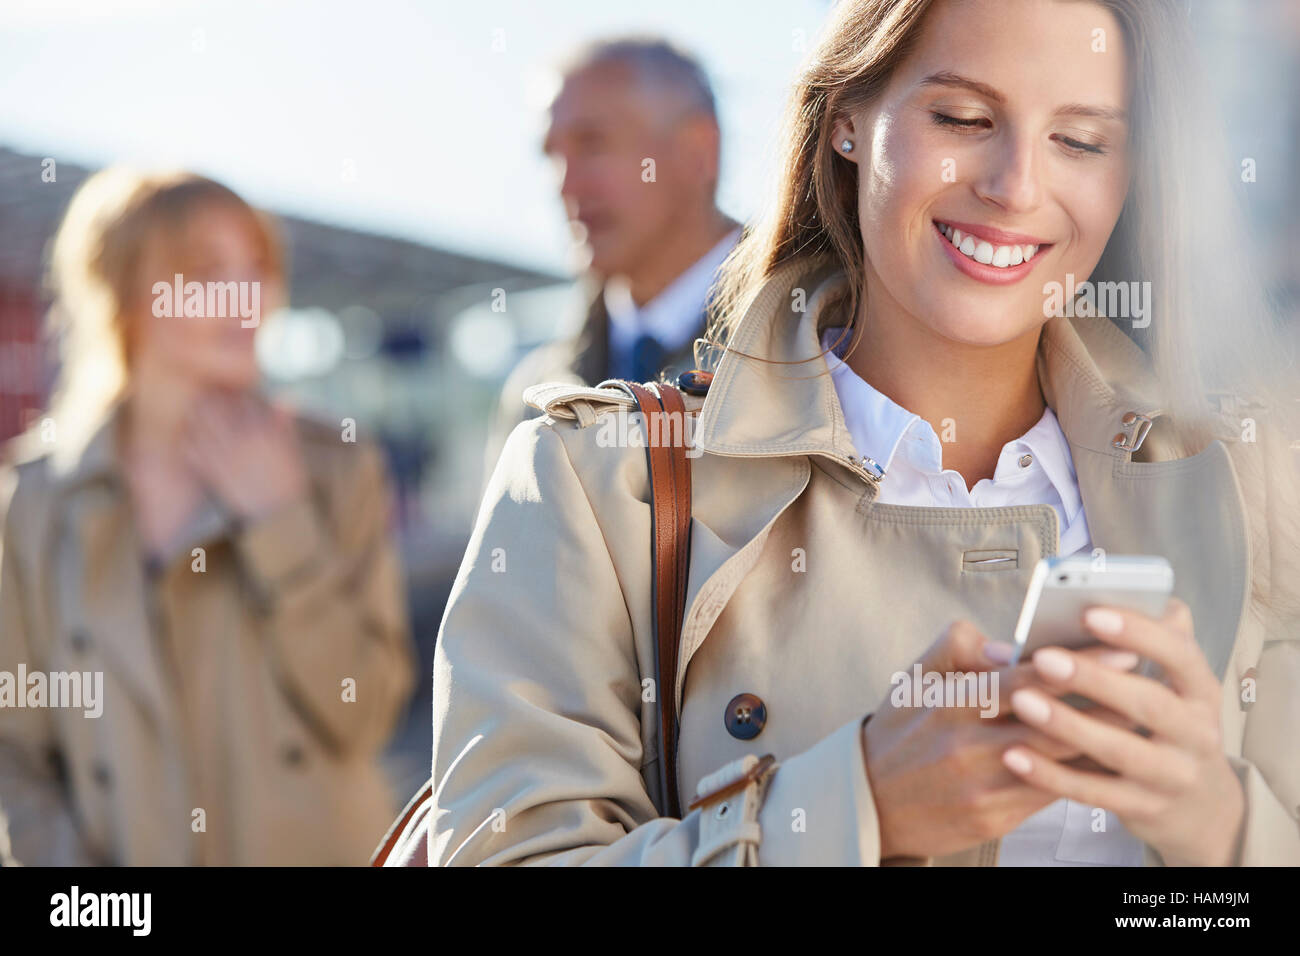 Smiling businesswoman texting with cell phone Stock Photo